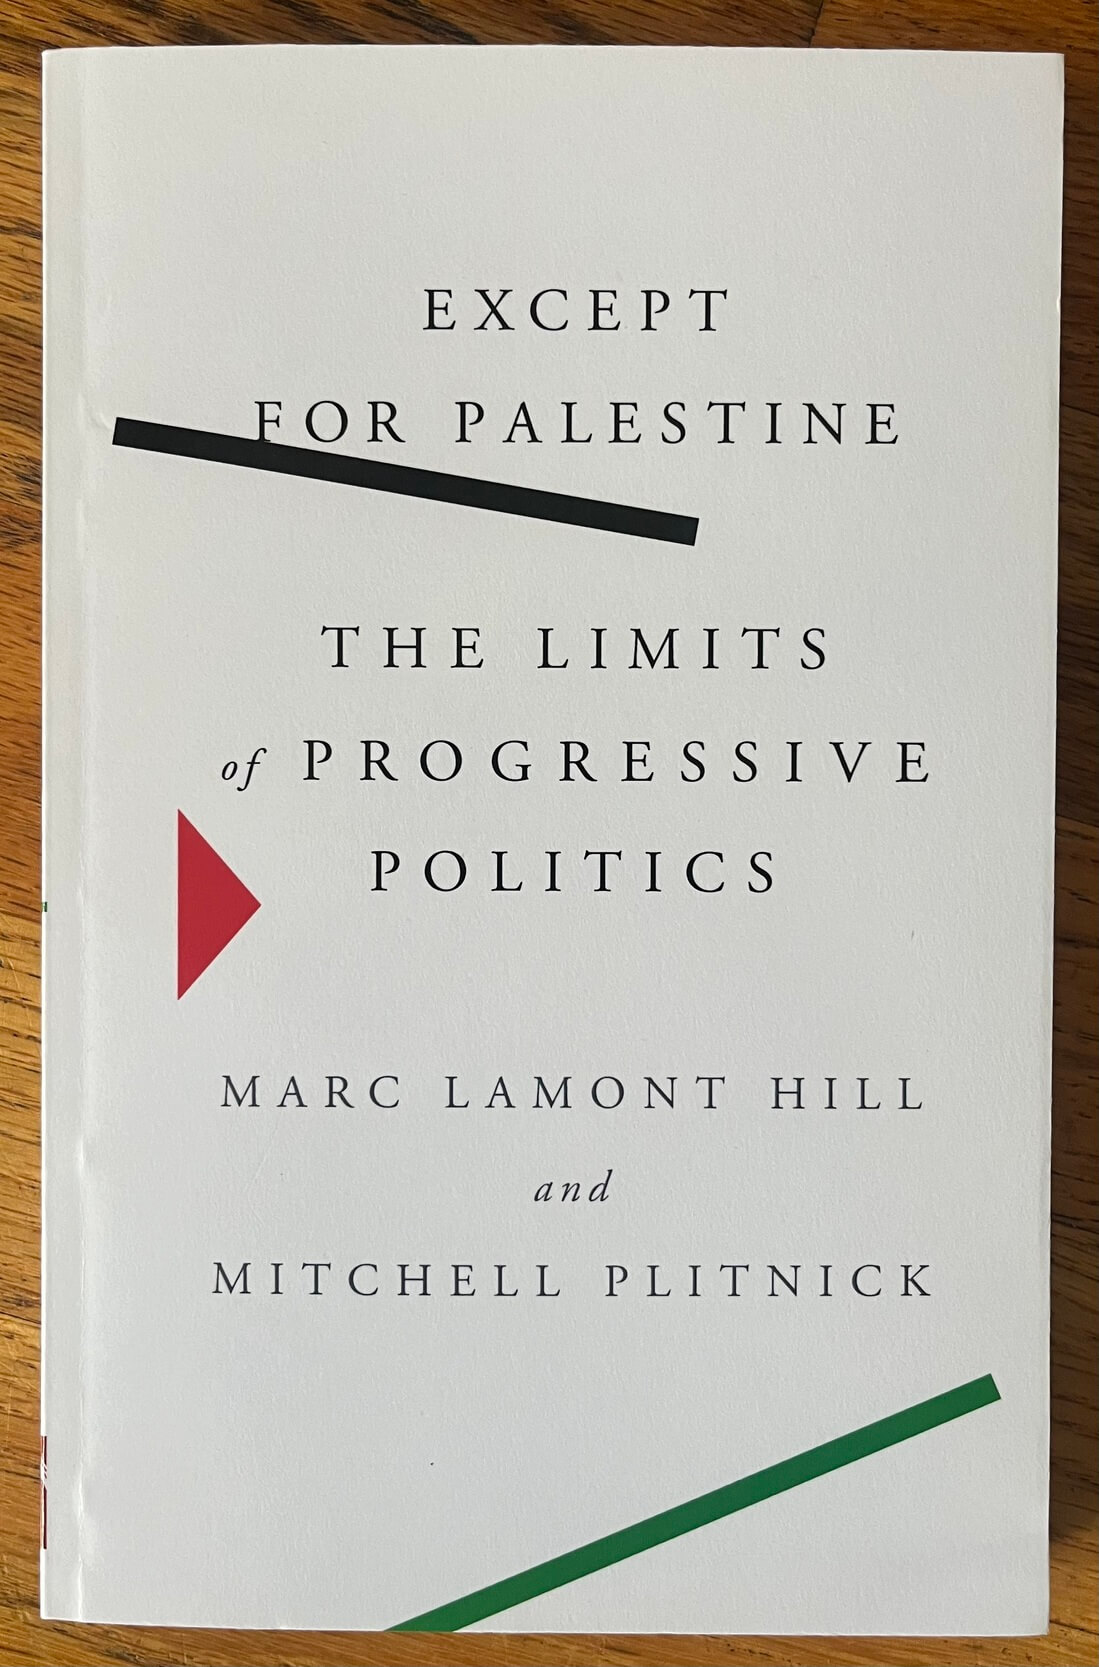 “Except for Palestine: The Limits of Progressive Politics” by Marc Lamont Hill and Mitchell Plitnik